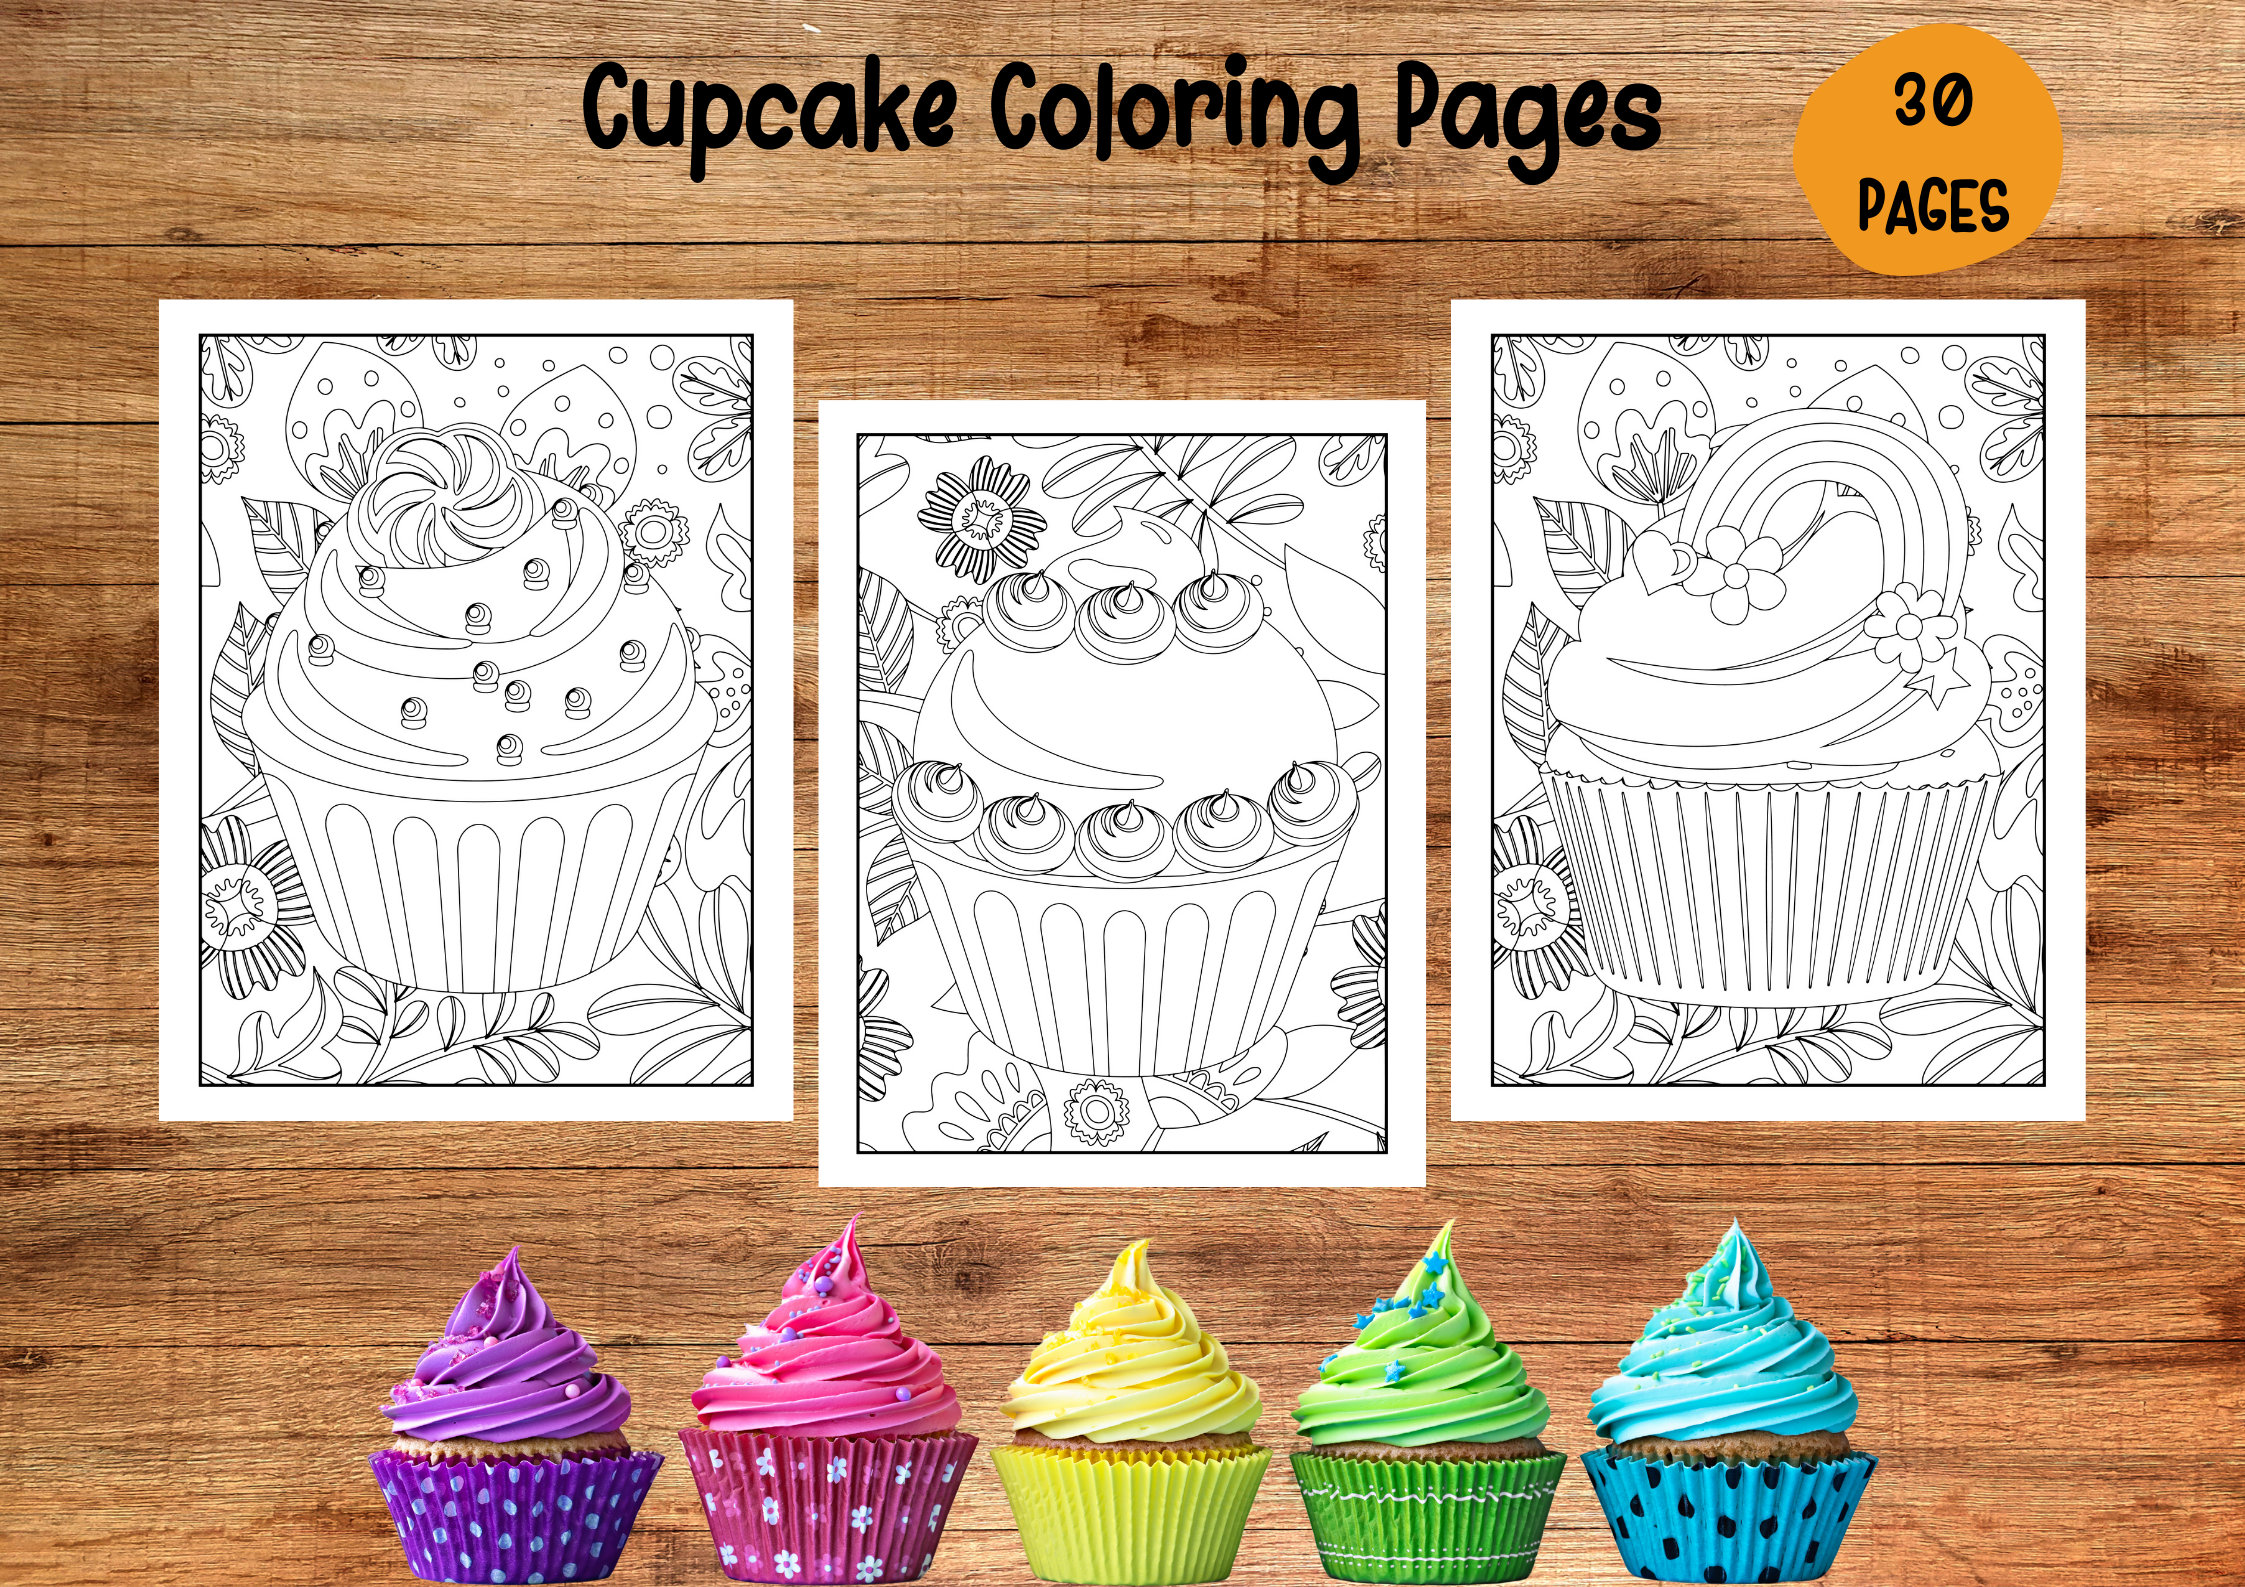 Cupcake coloring pages printable pages super sweet cupcakes coloring book desserts coloring sheets